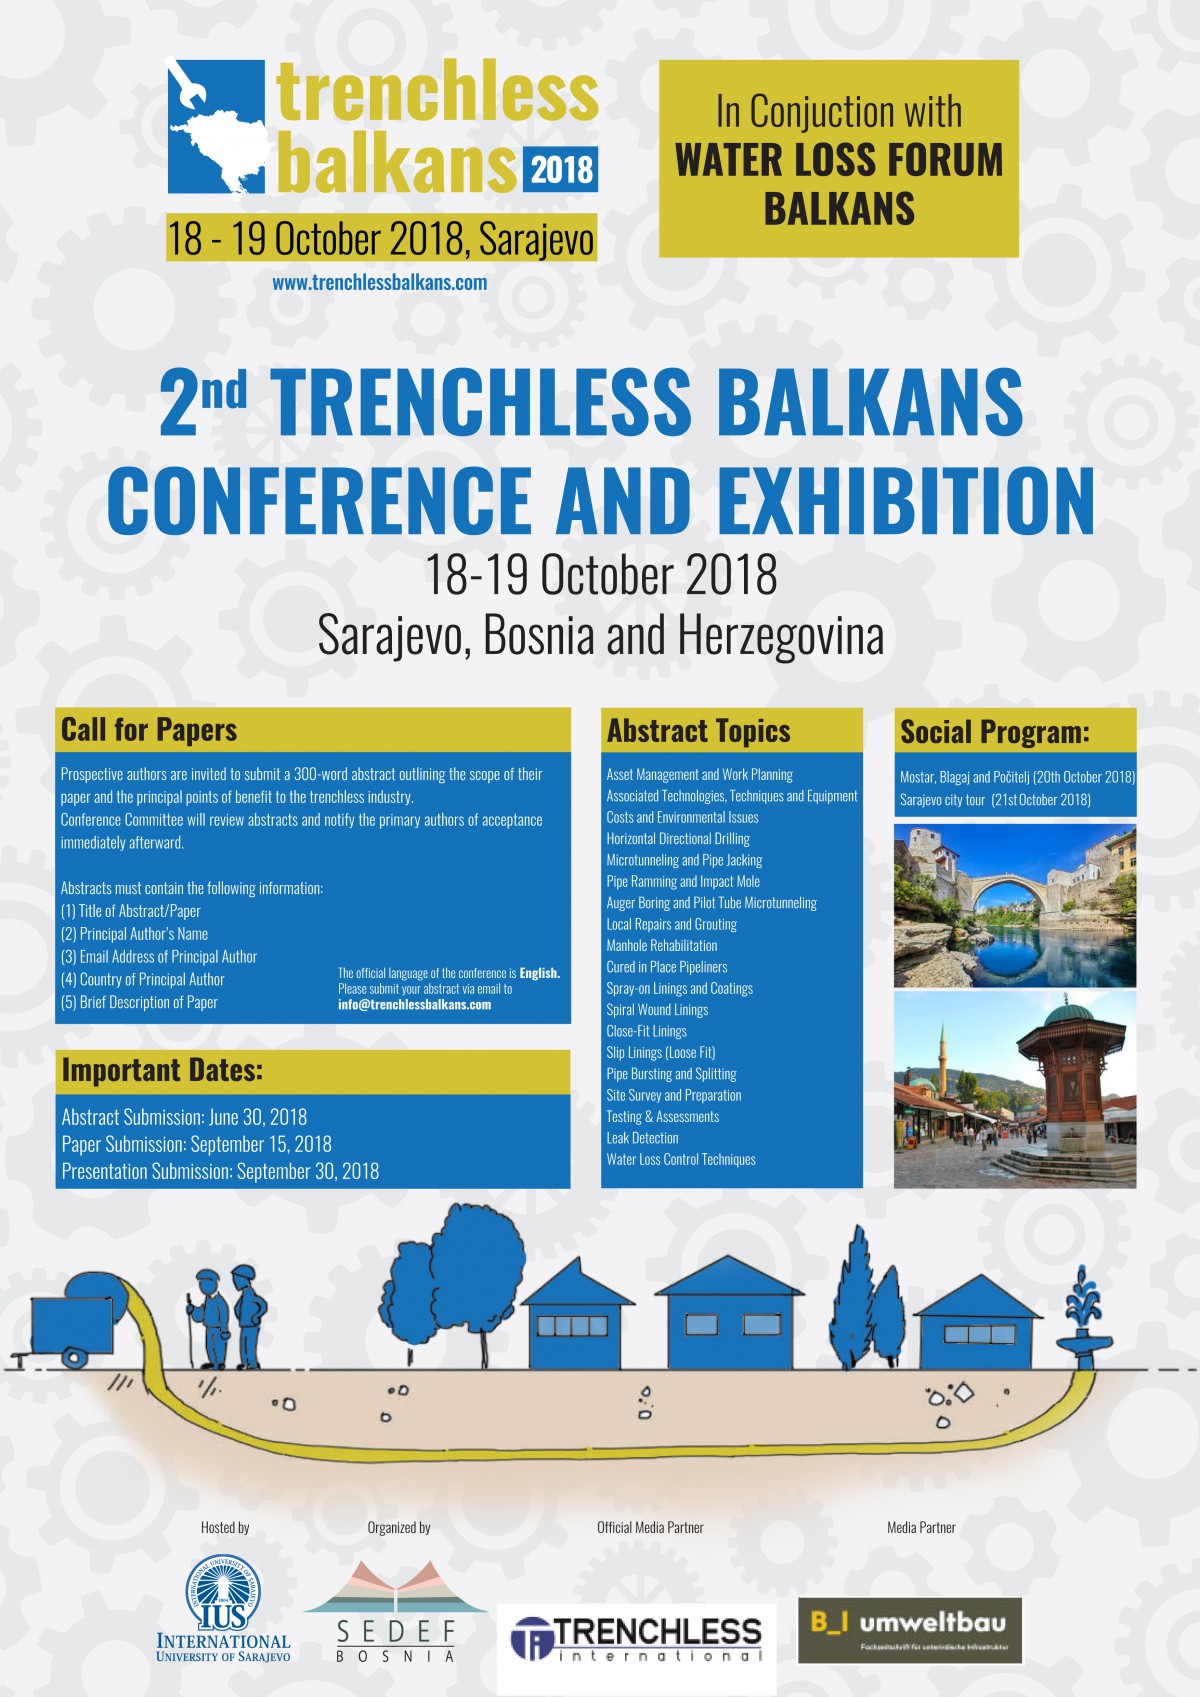  2nd TRENCHLESS BALKANS CONFERENCE AND EXHIBITION 